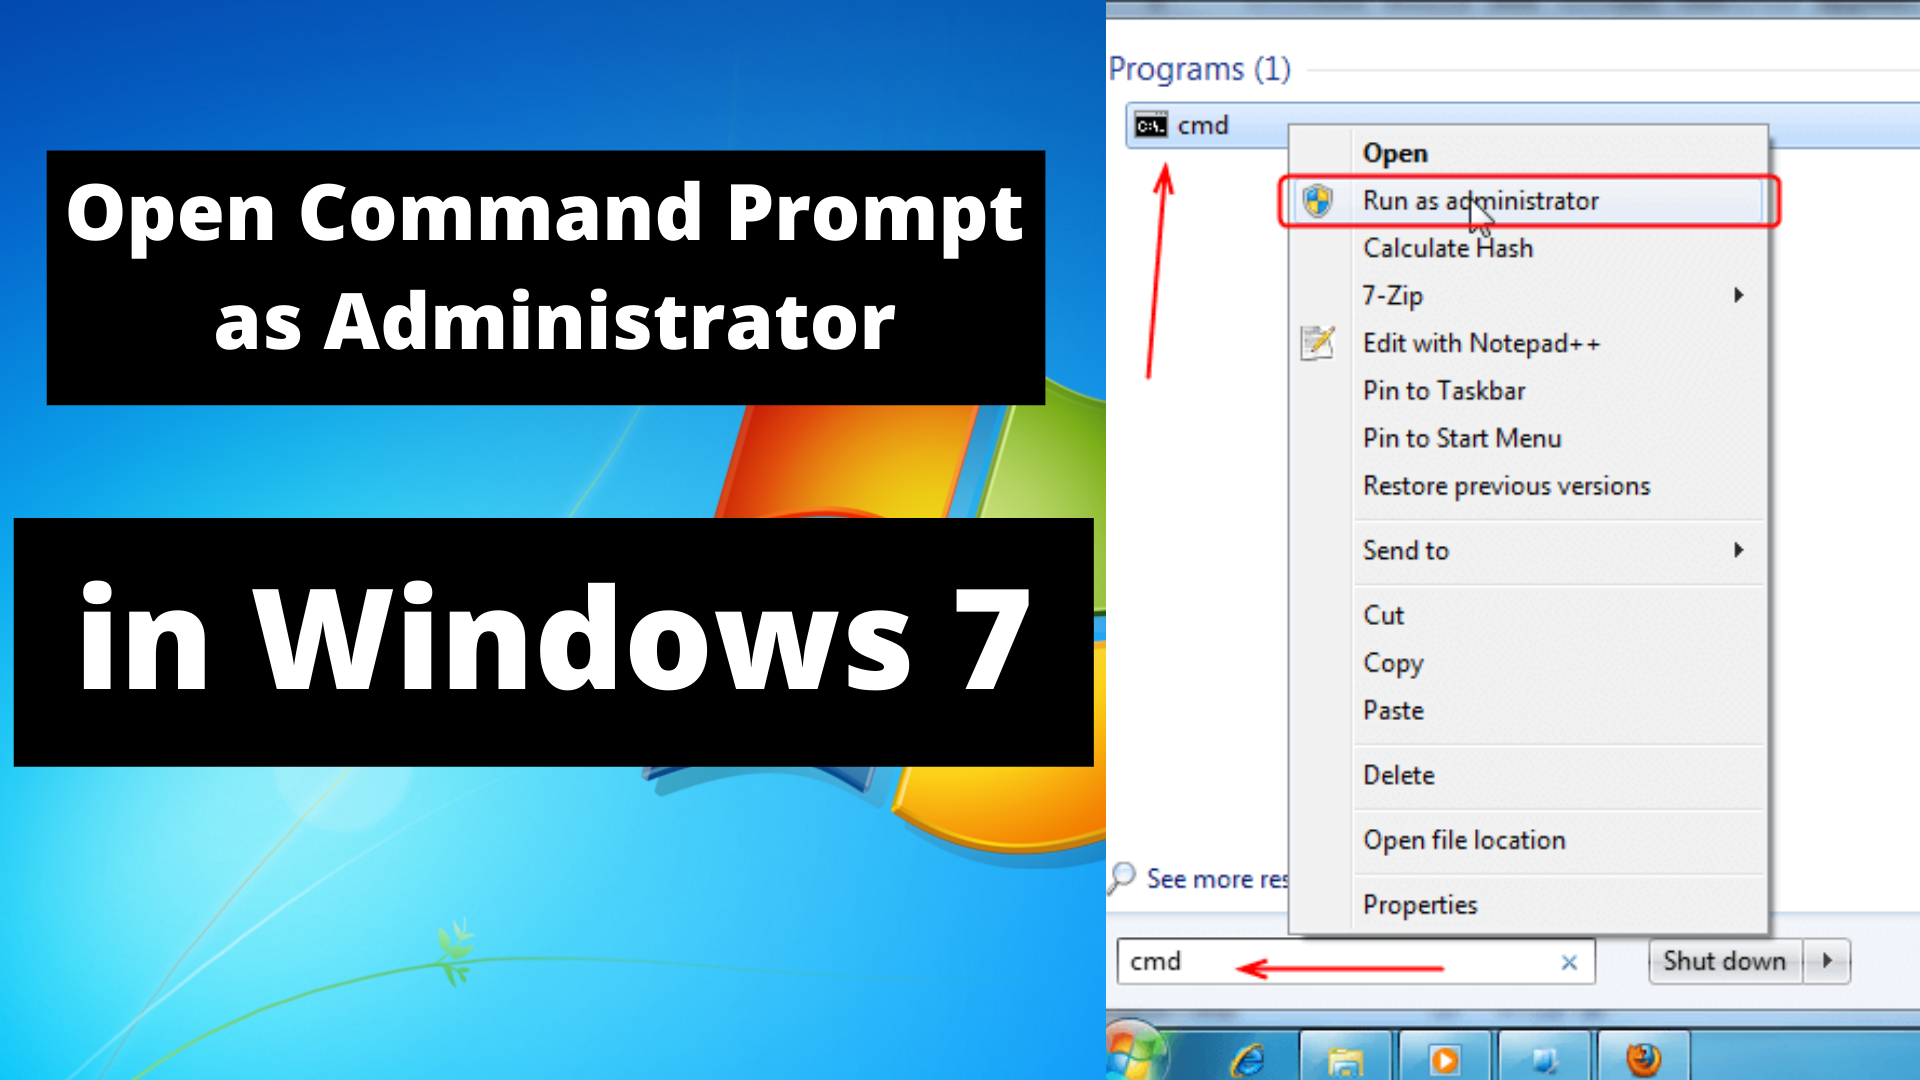 Command prompt admin. Cmd as Administrator. Run Administrator Windows. Prompt here.